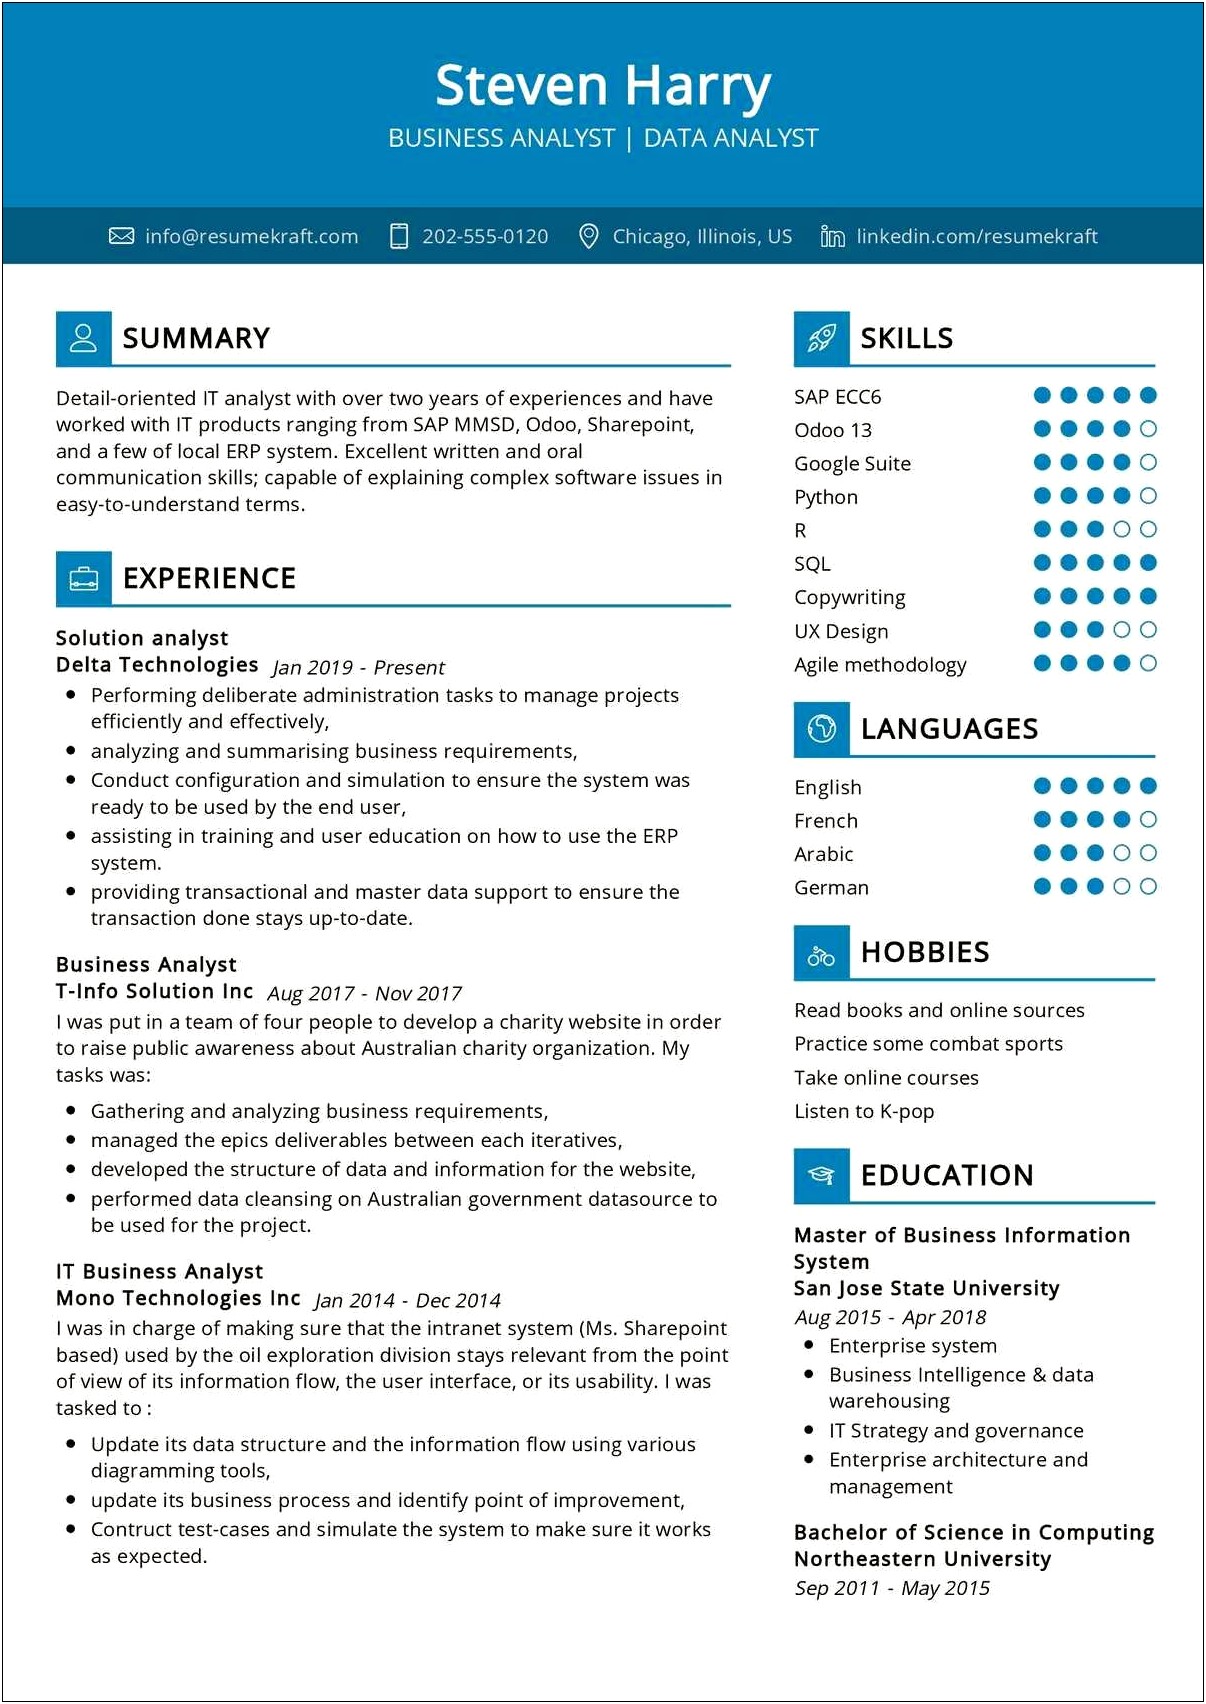 Business Analyst With Data Warehouse Experience Resume